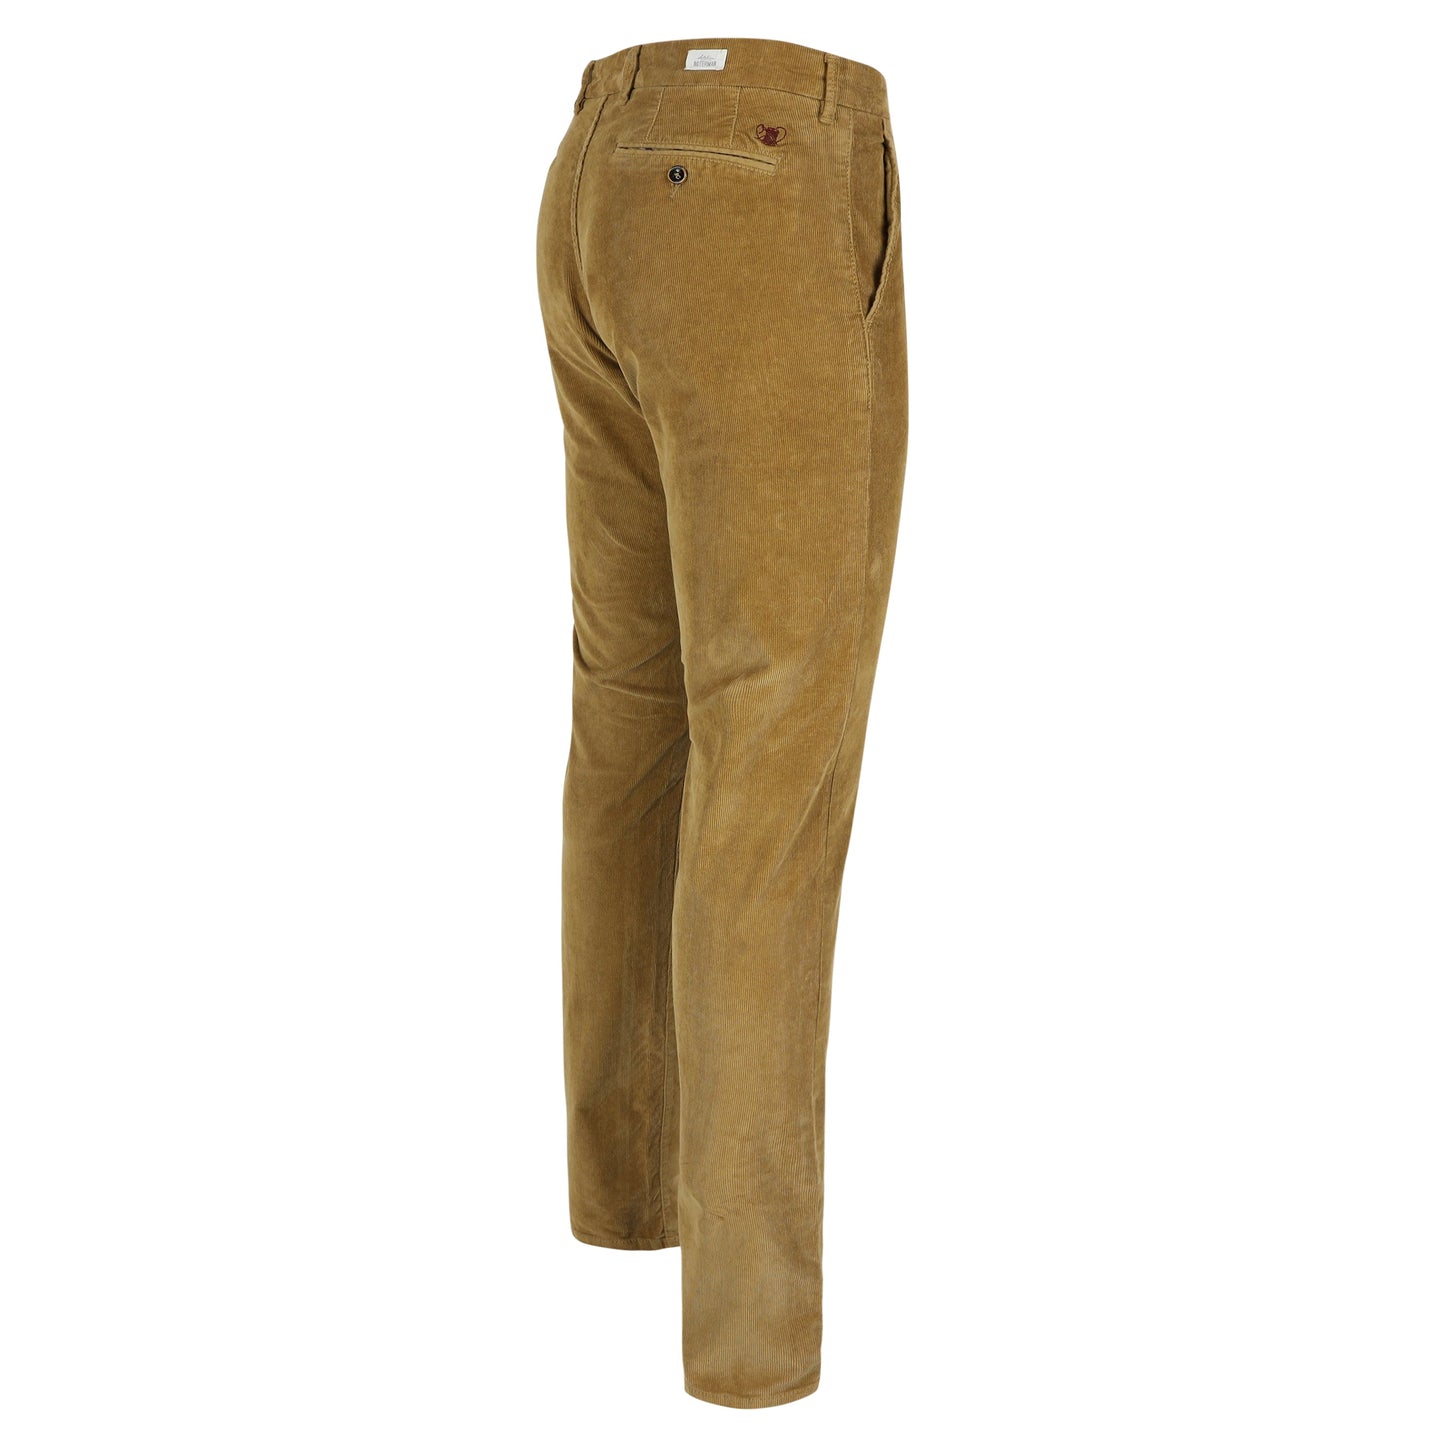 Offwhite corduroy slim fit trousers Atelier Noterman - 1585/737